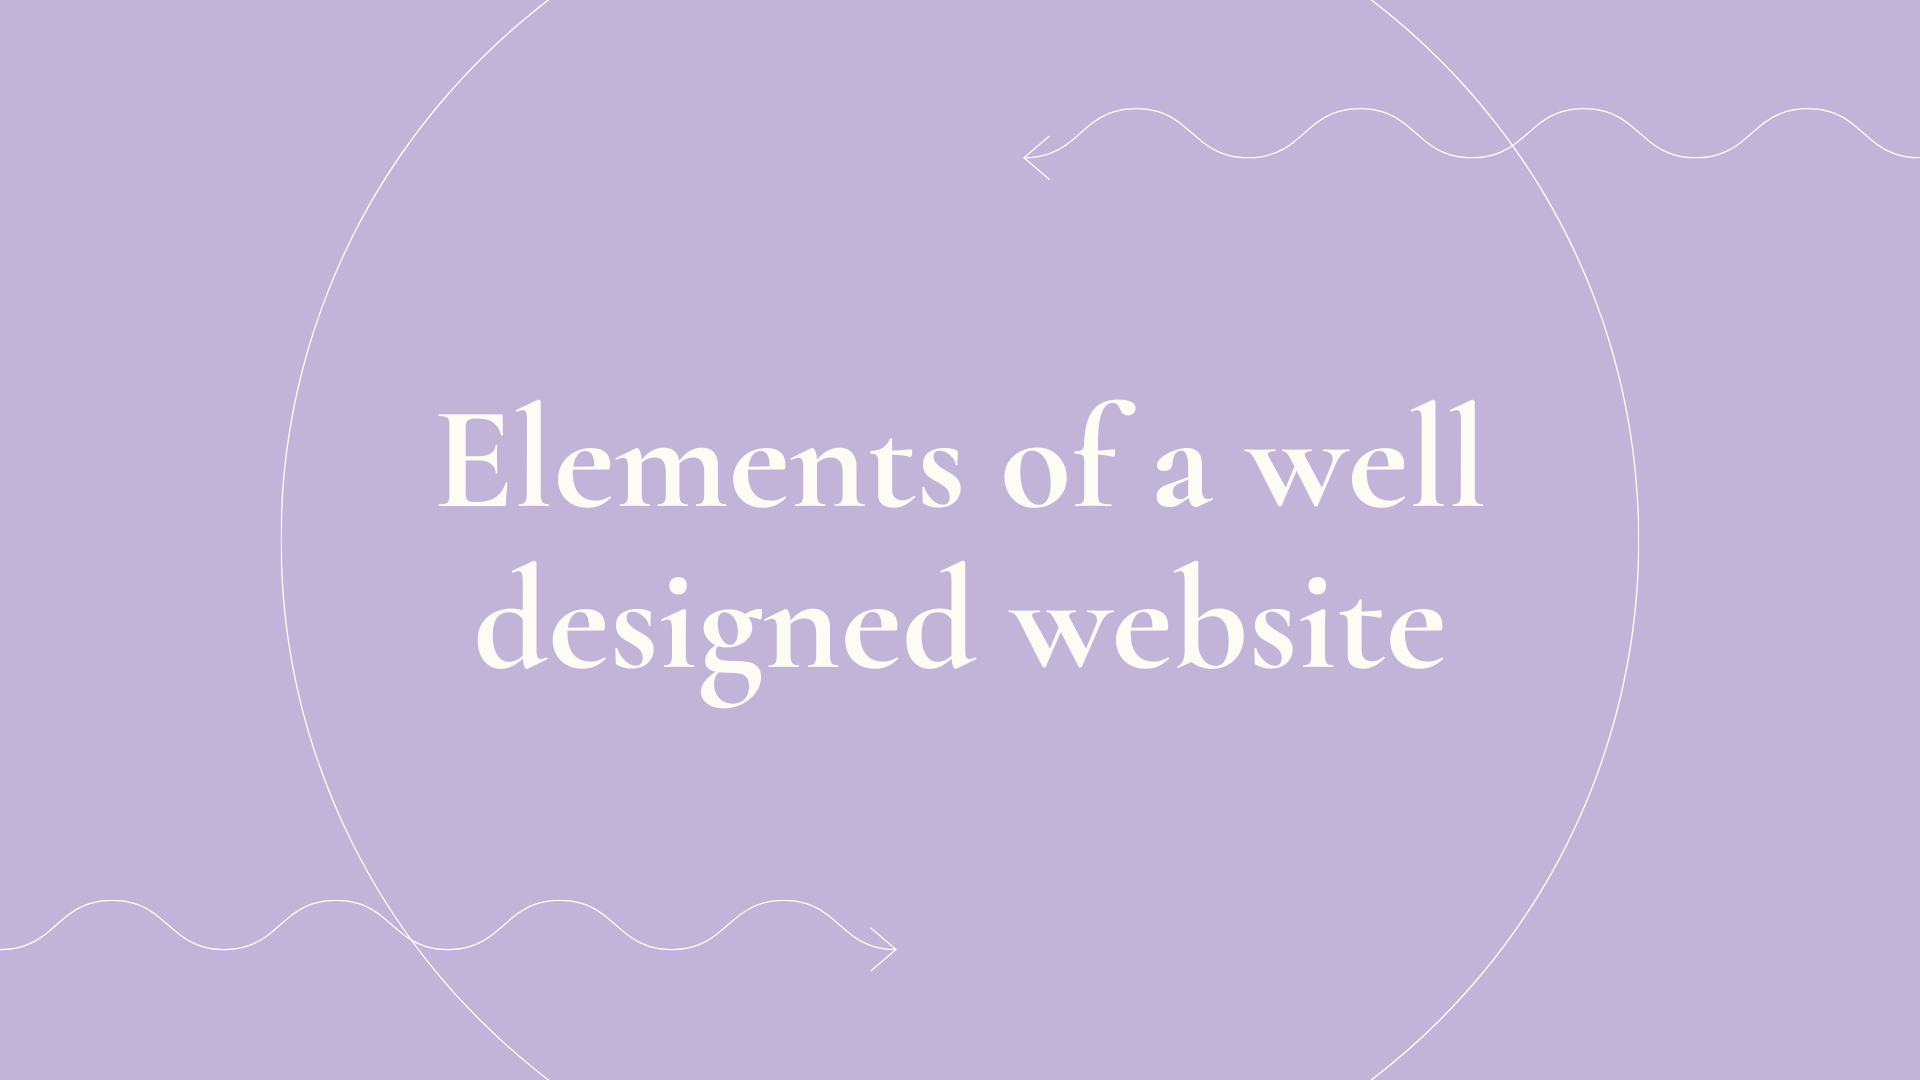 Elements of a well designed website